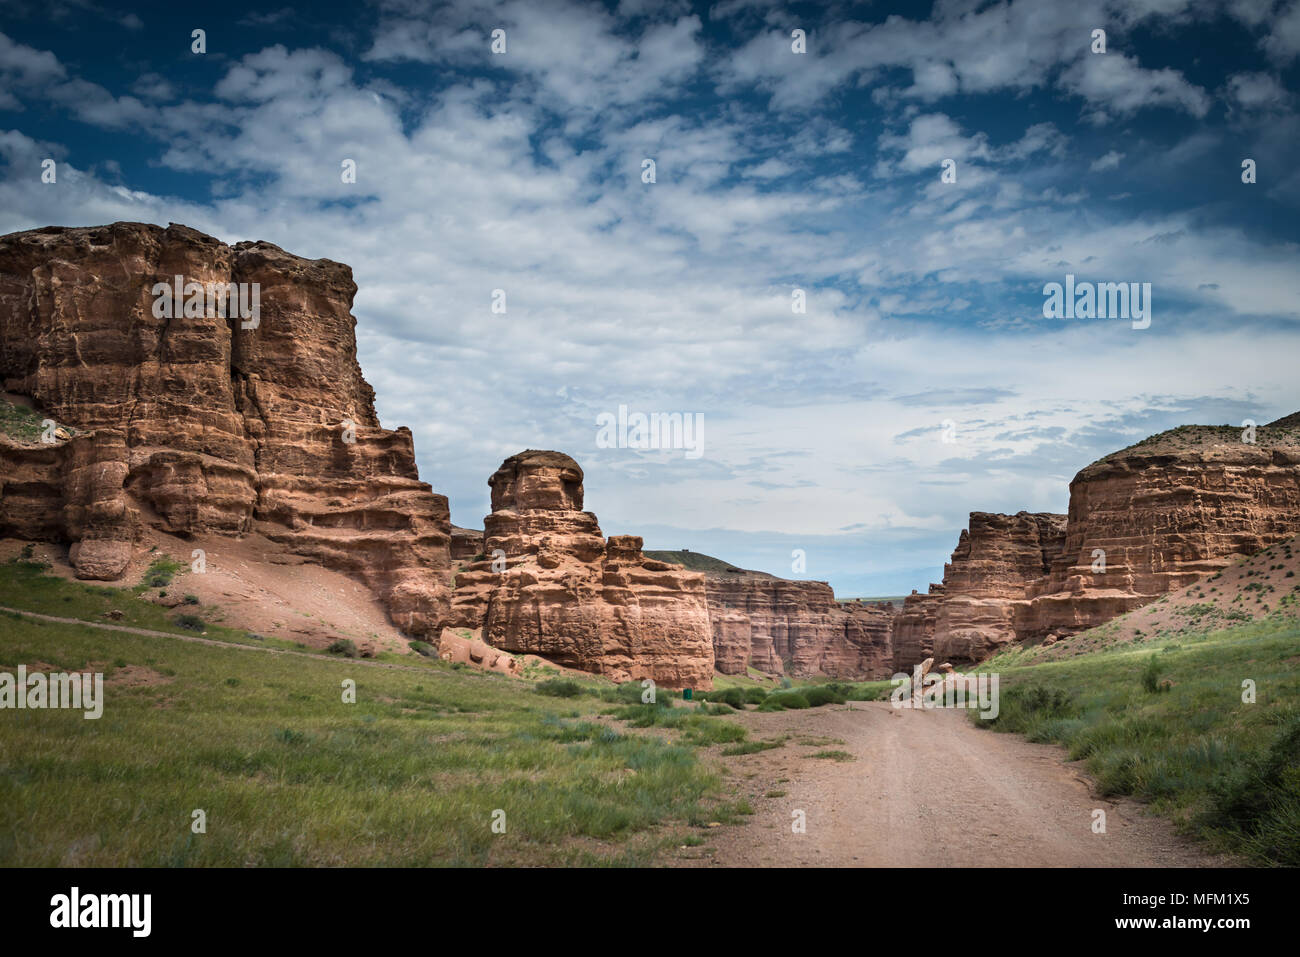 Scenic landscape inside canyon with long country road. Rocks on sides. Cloudy dramatic sky. Stock Photo